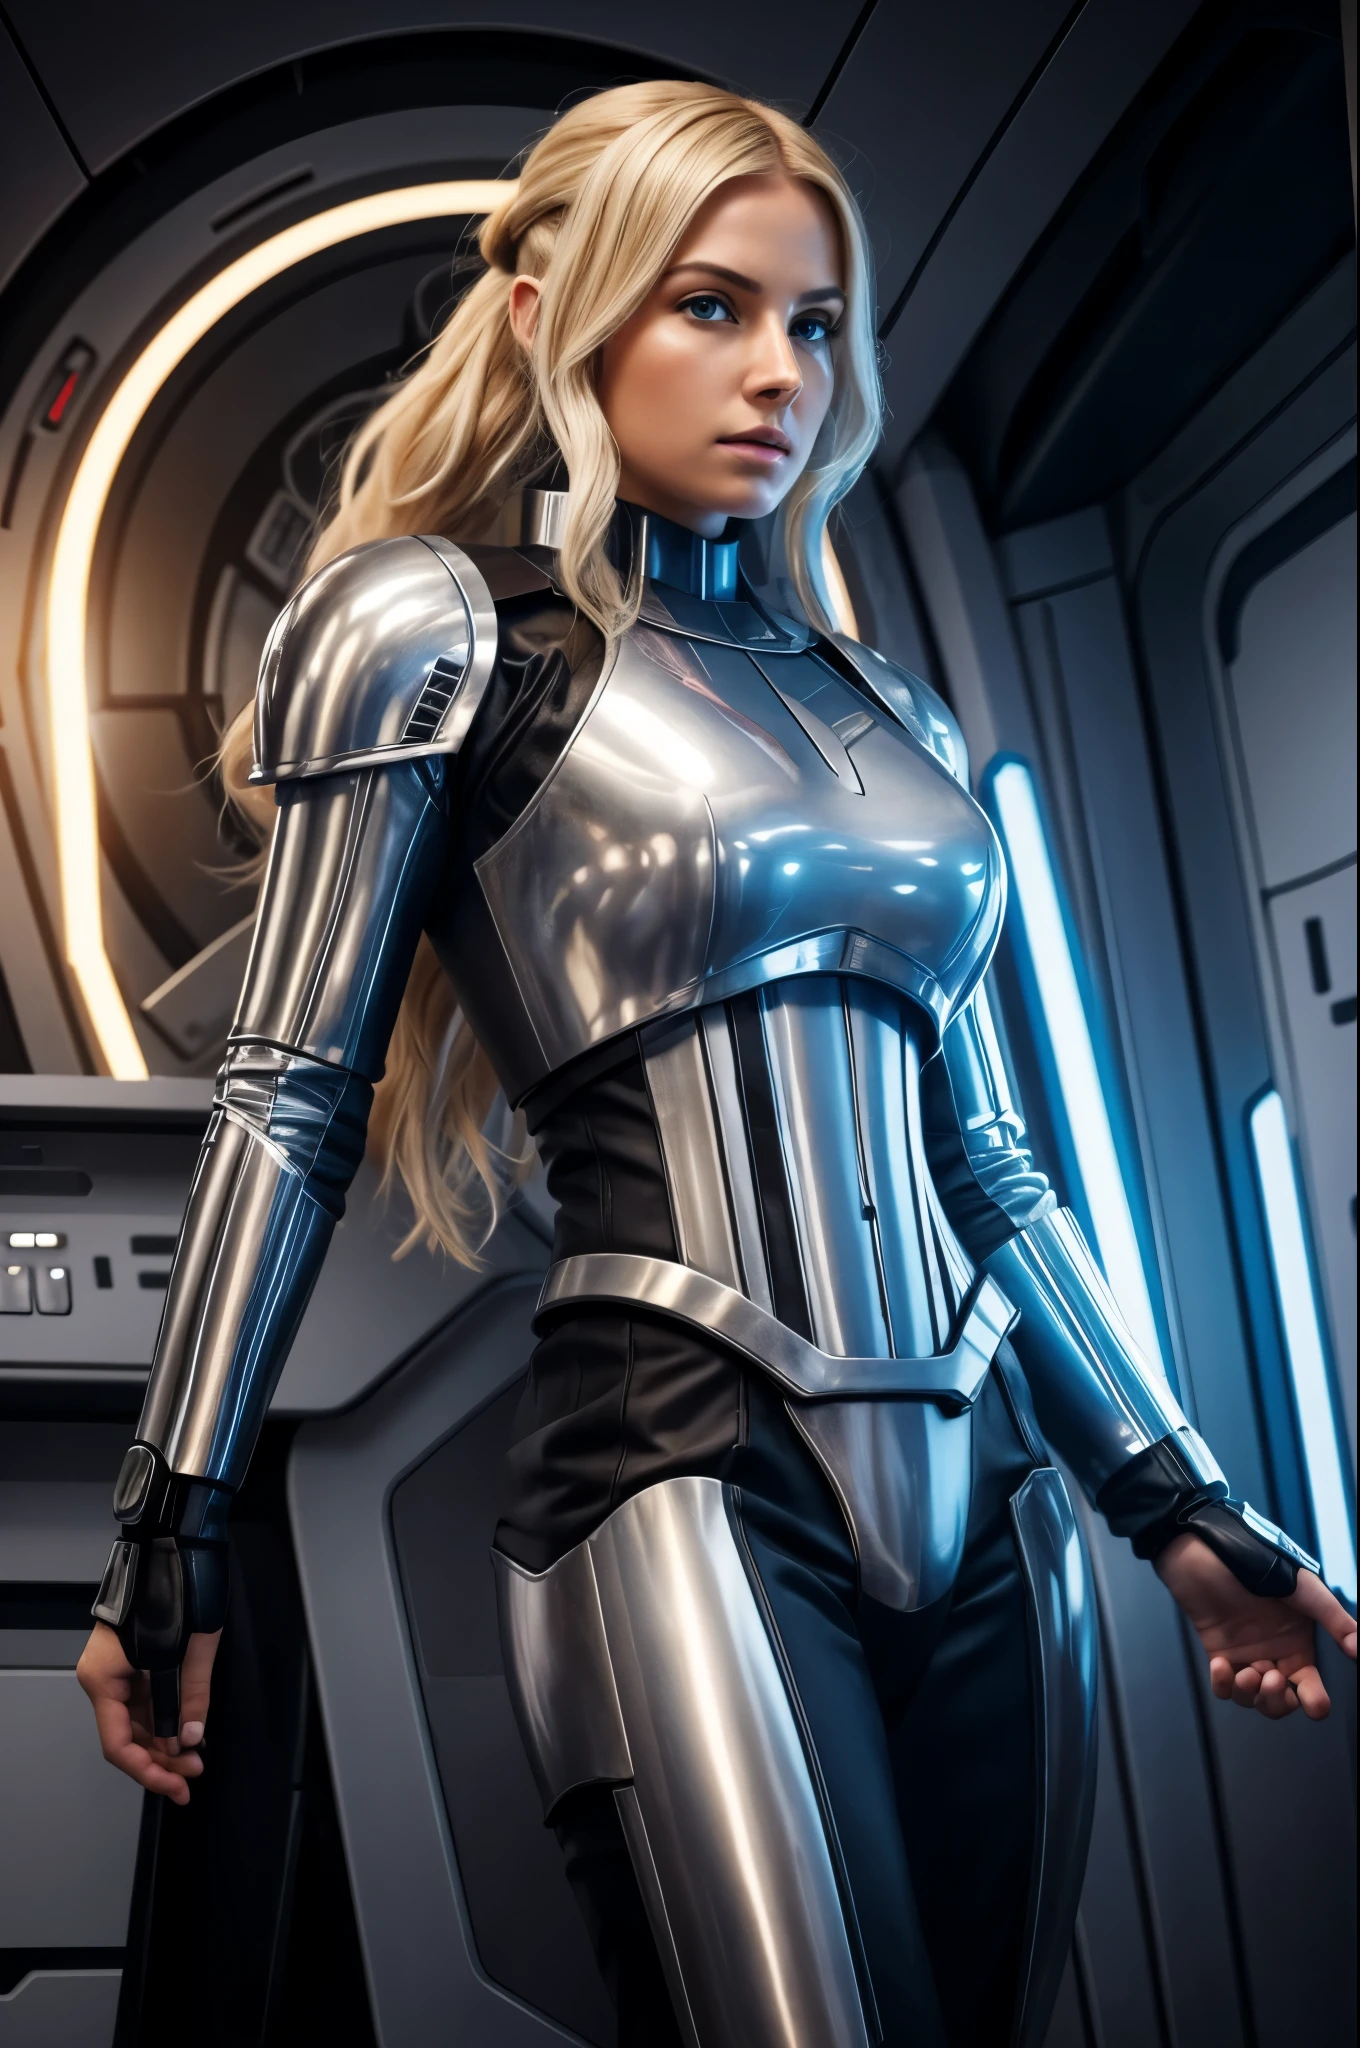 there a beautiful blonde woman in a star wars costume in a spaceship, an black stormtrooper armour from star wars, imagen cuerpo completo, piernas largas, small waist, rostro con pecas, cabello rubio dorado, ojos azules, labios gruesos, pose sexy, trasero redondo, futuristic starship crew member, solo female character, hyper realistic sci fi realistic, cinematic highly detailed, sci fi female character, 8 k high detail and intricate, sci-fi female, highly detailed vfx portrait of, sci-fi highly detailed